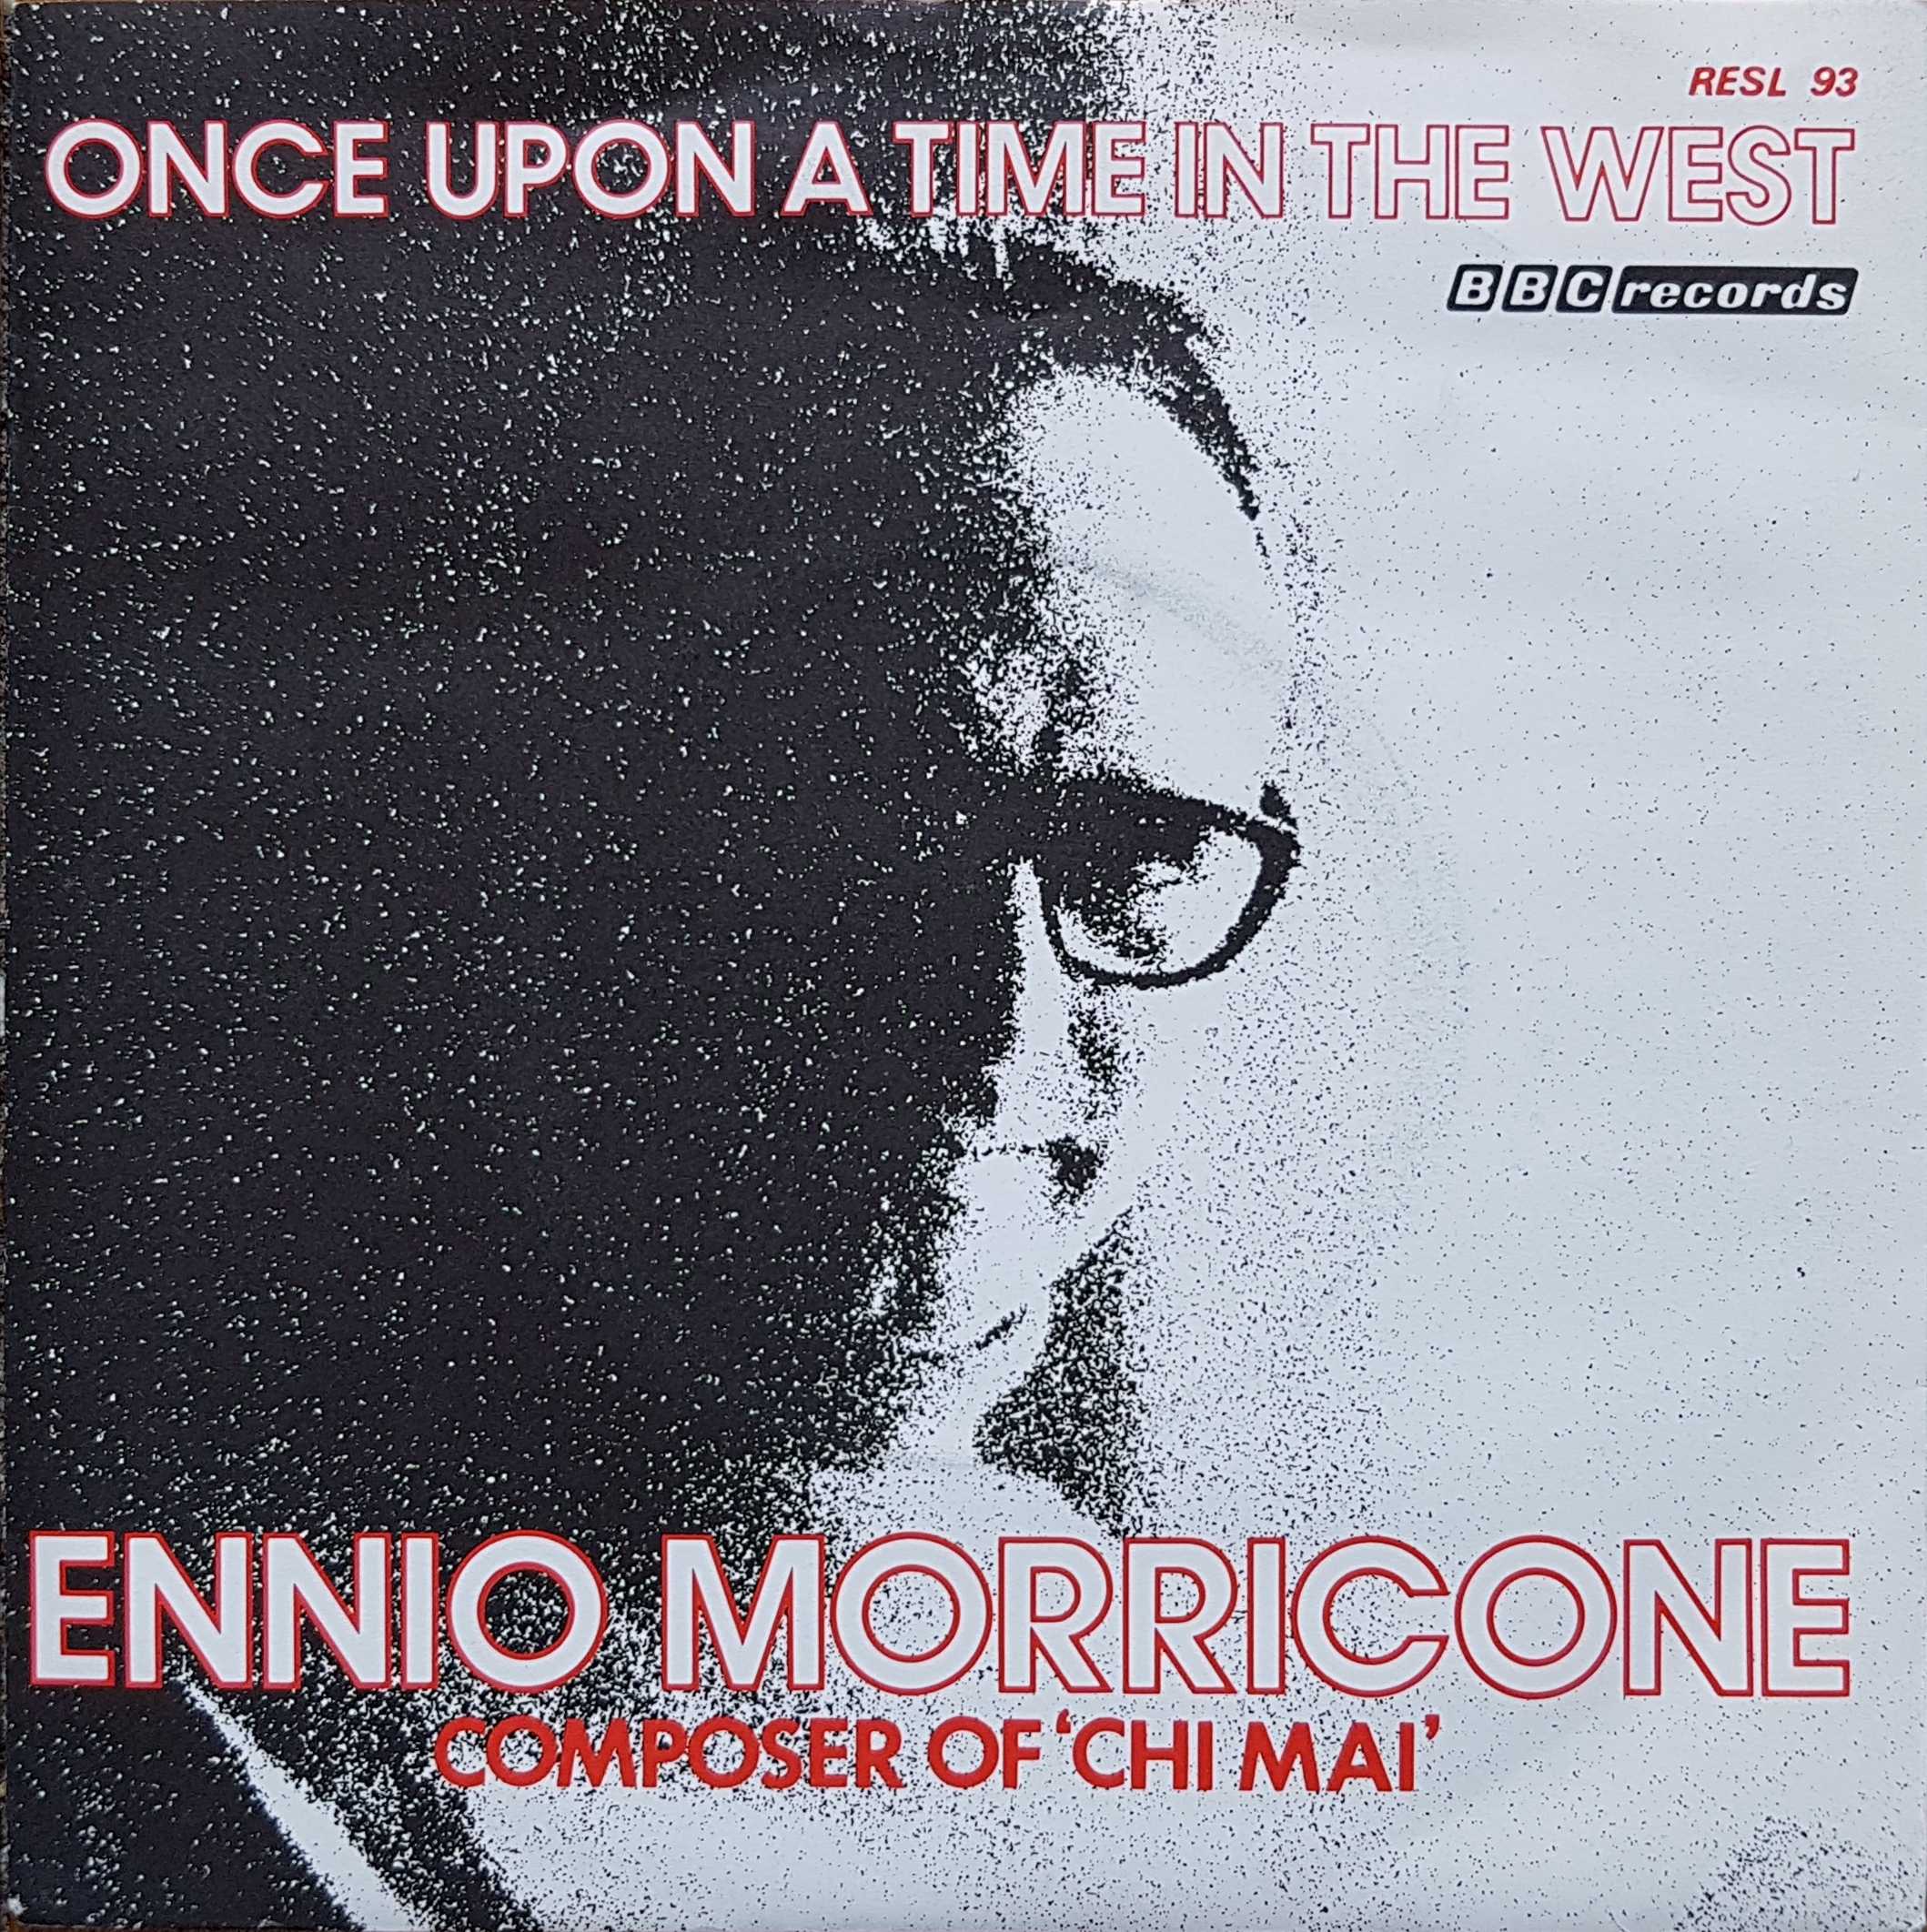 Picture of RESL 93 Once upon a time in the west by artist Ennio Morricone from the BBC records and Tapes library